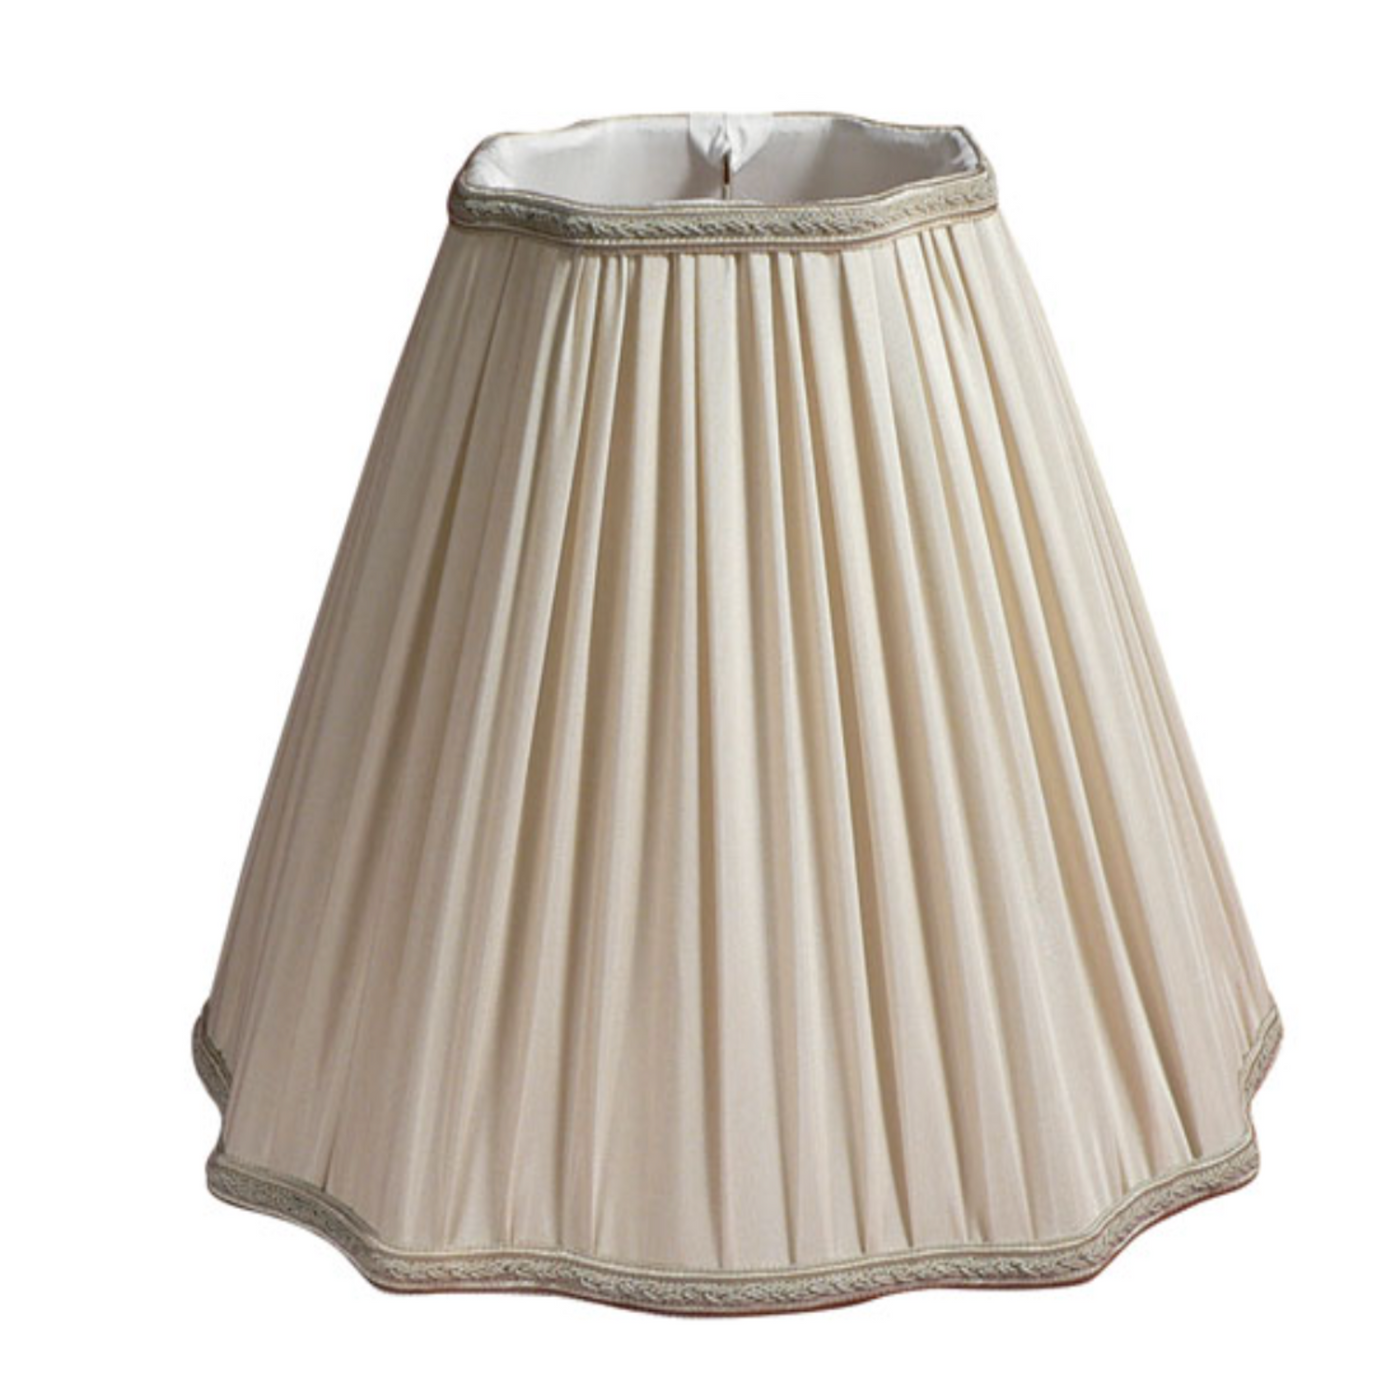 Fancy Square Pleat Lampshade